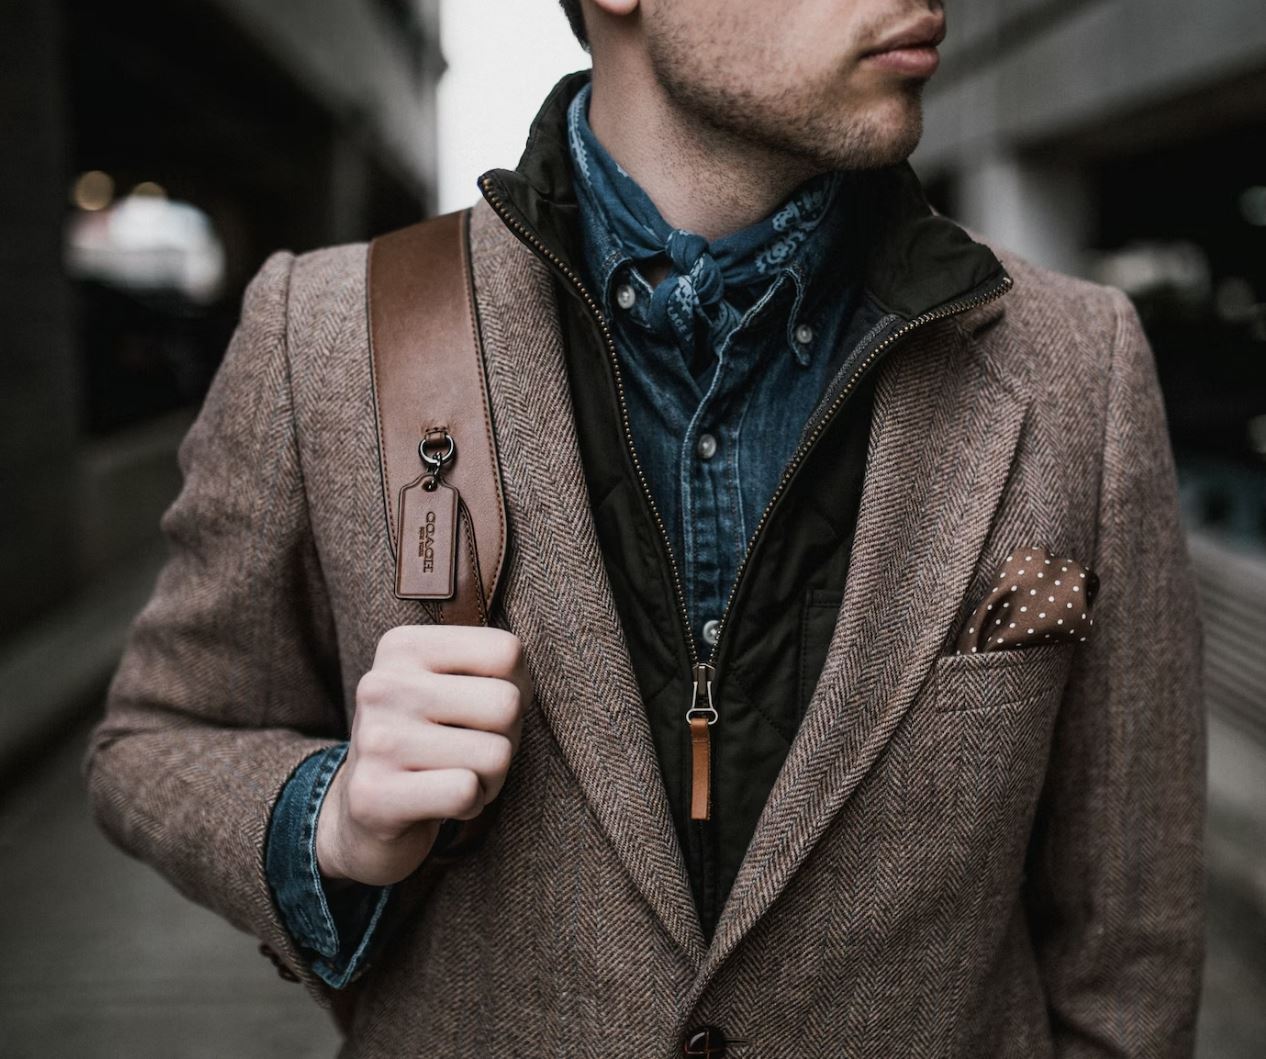 Sport Coat vs. Blazer vs. Suit Jacket: What's the Difference?